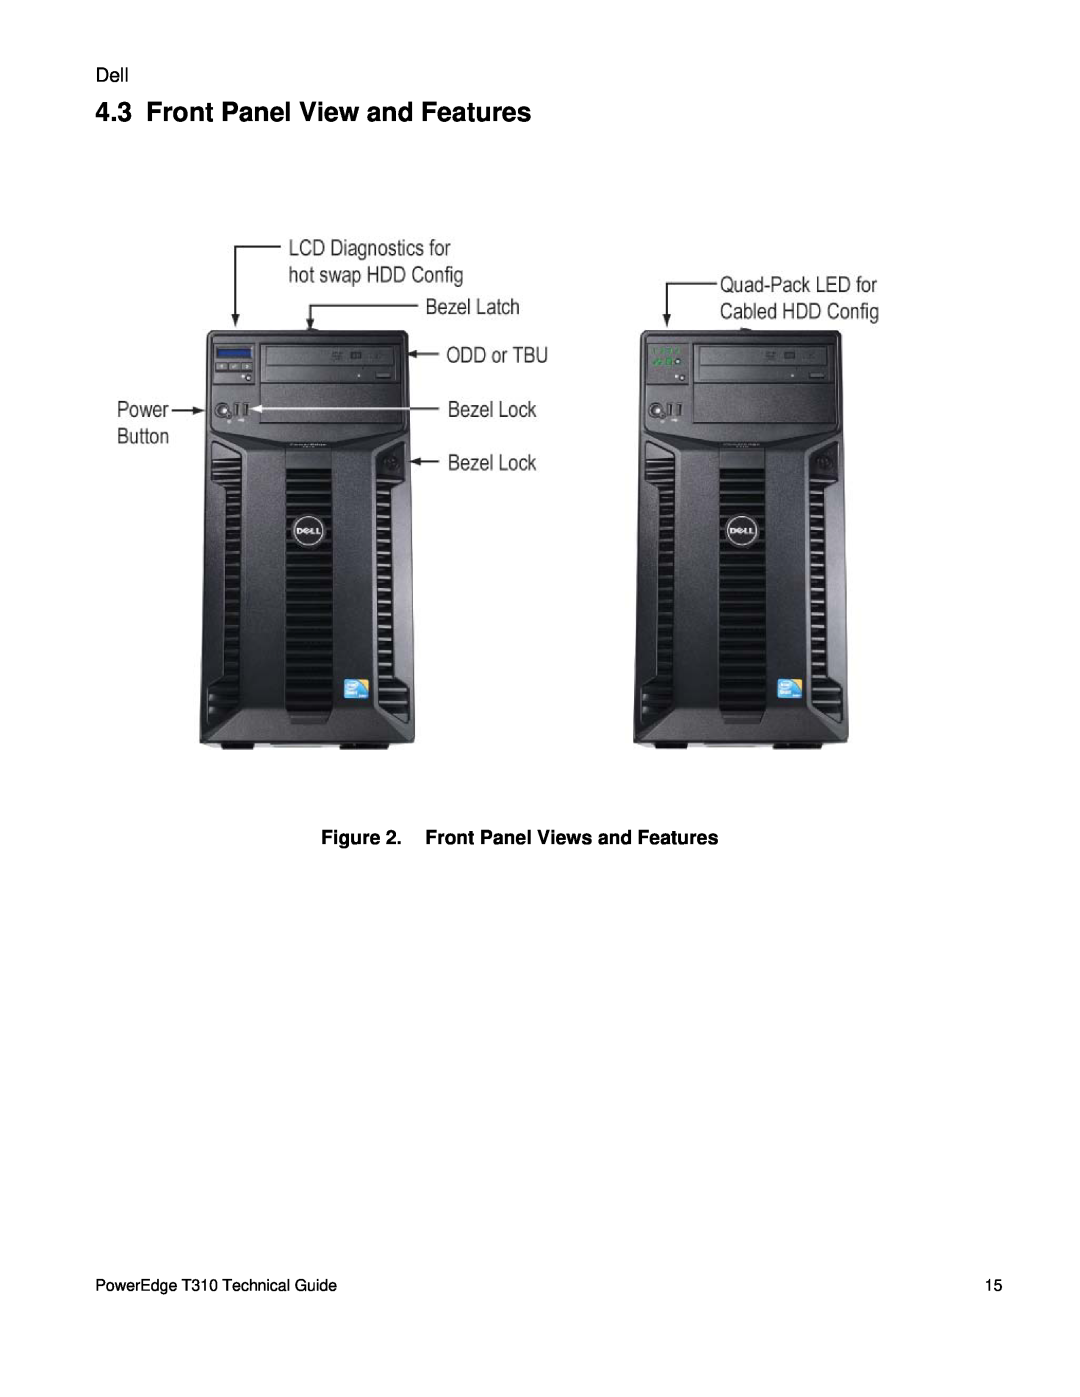 Dell manual Front Panel View and Features, Front Panel Views and Features, PowerEdge T310 Technical Guide 